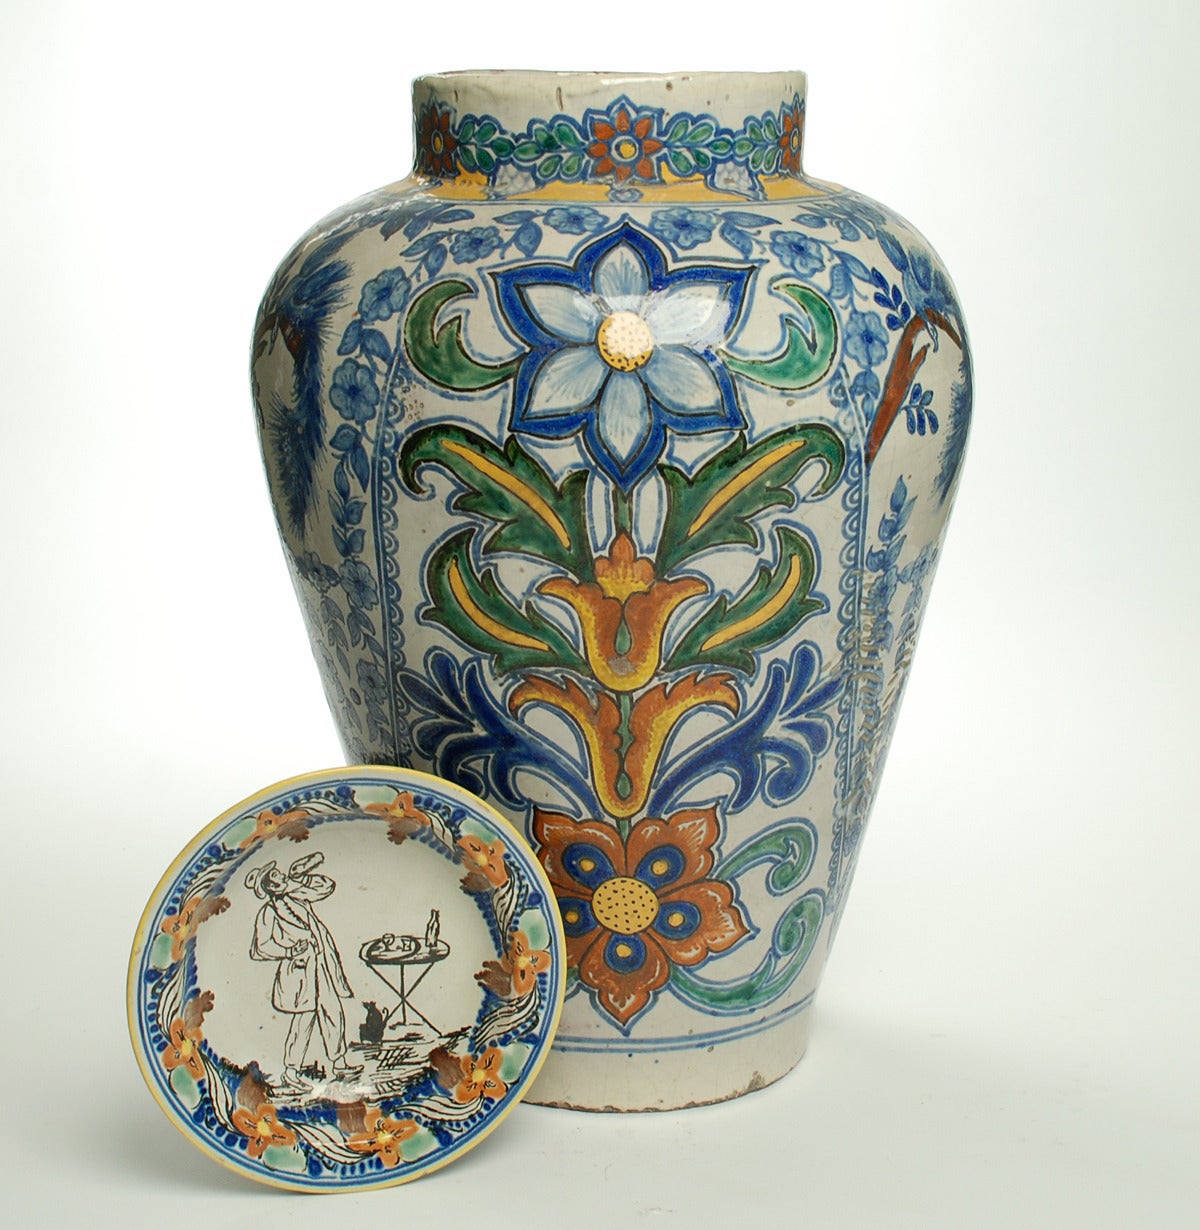 This large late 19th century talavera Poblana Jarron is decorated all over in deep shades of pale blue, green, yellow and red with colorful foliate patterns separated by ring borders and geometric motifs. The smaller talavera plate is shown for